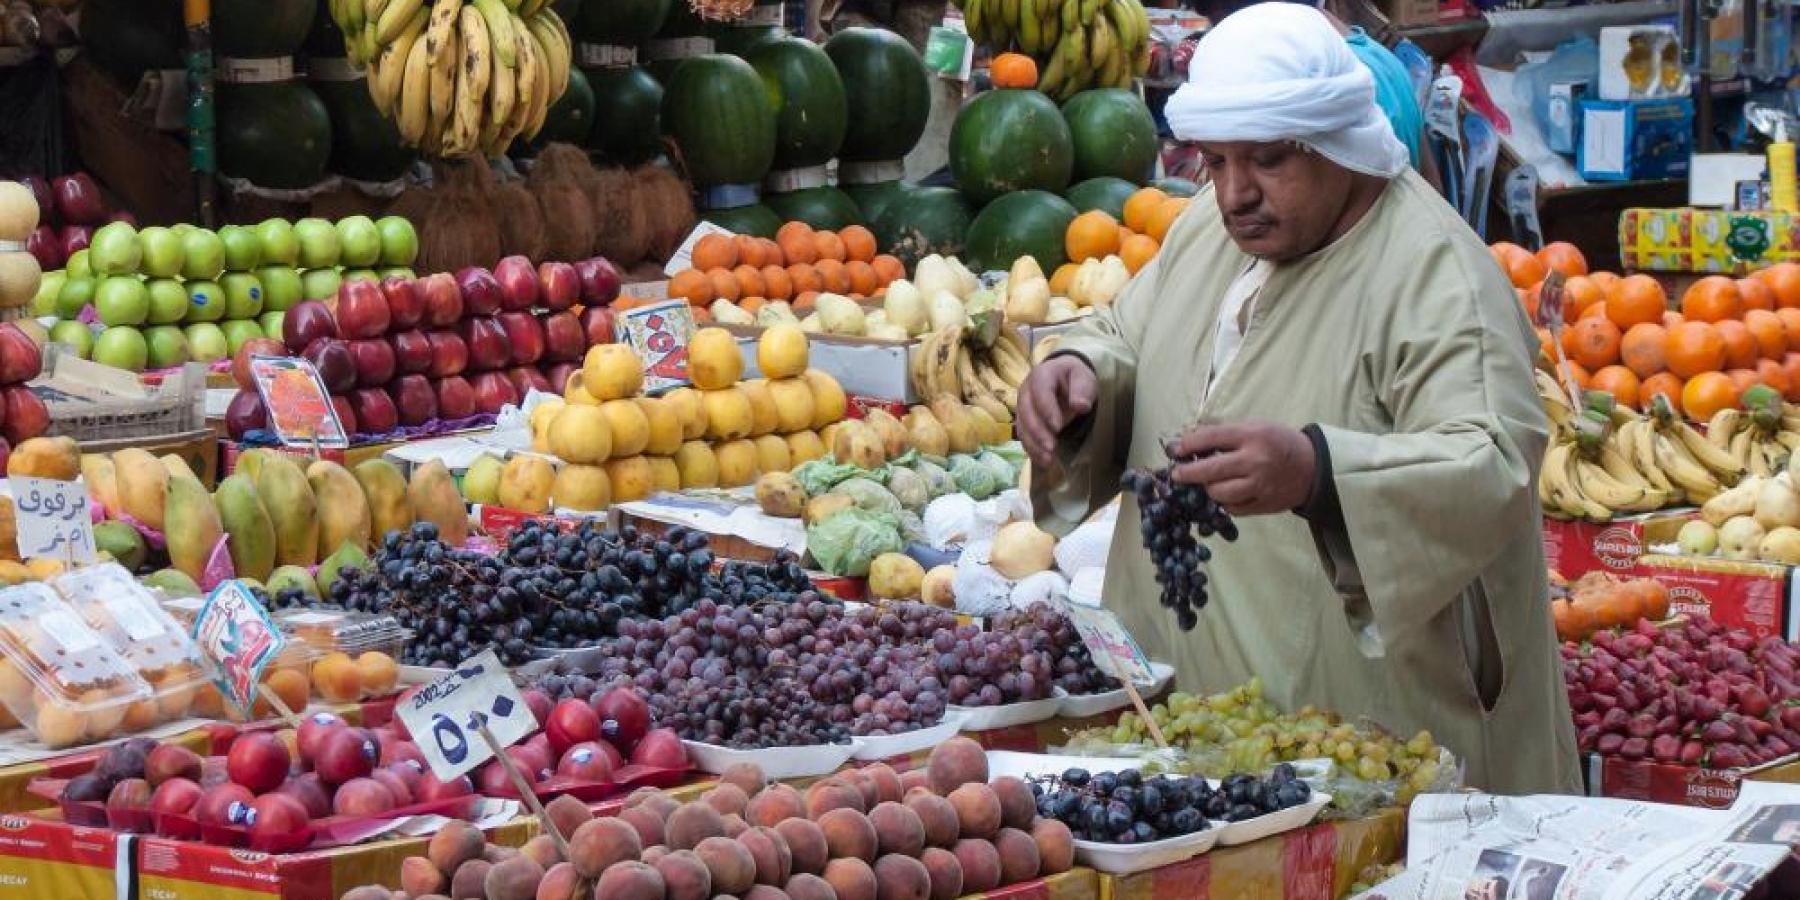 Fruit market in Cairo, Egypt © Cuyahoga from Pixabay